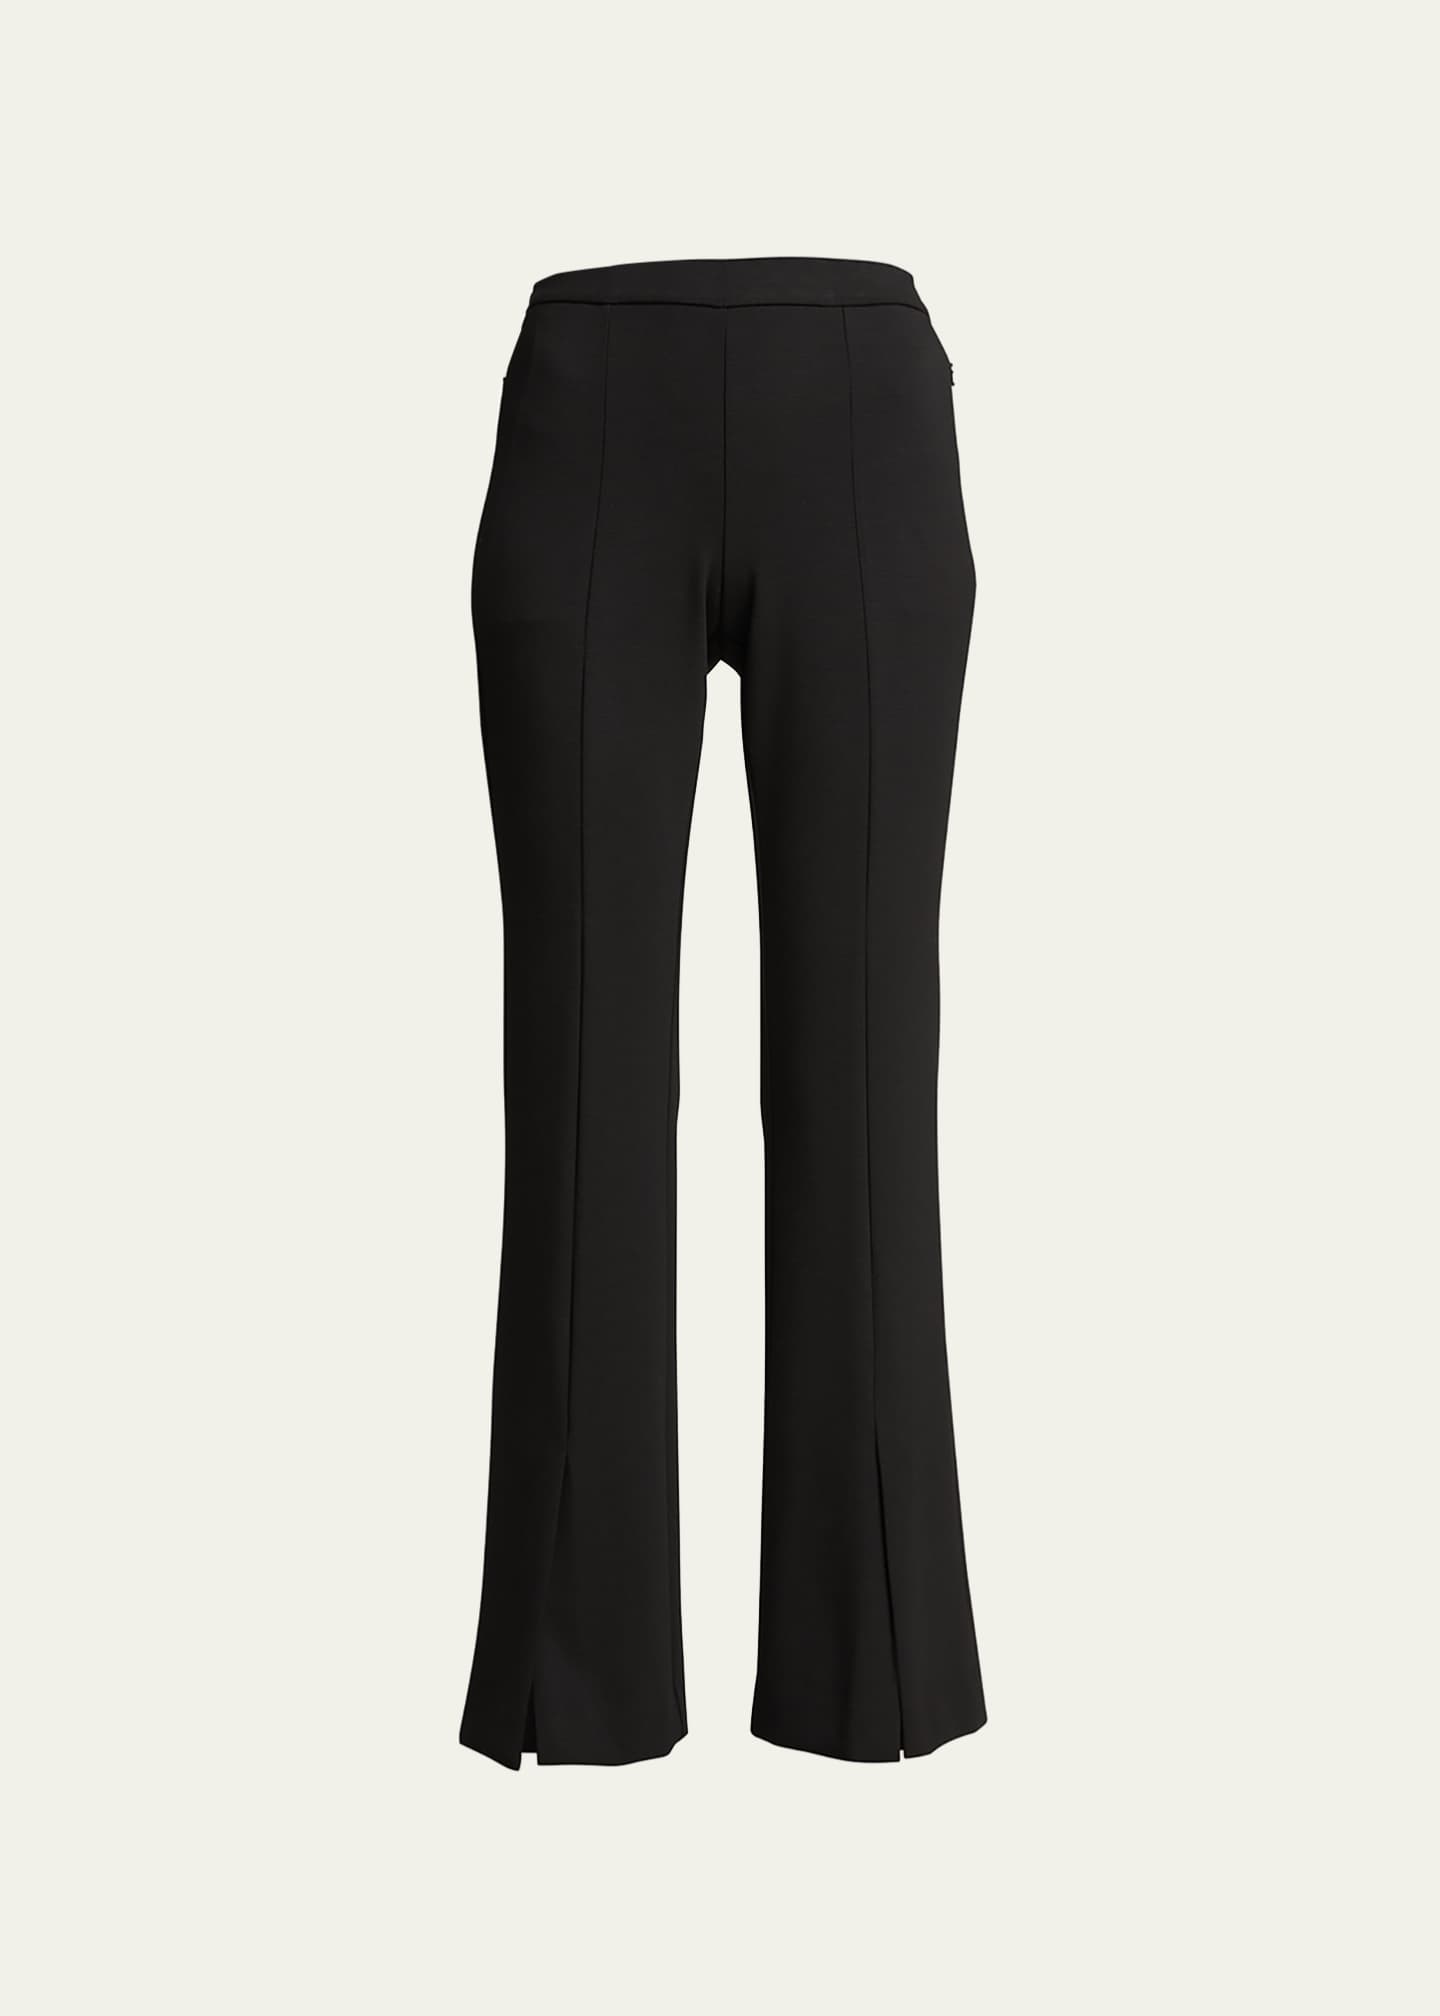 Theory Demitria Flare Double-Knit Vented Pants - Bergdorf Goodman